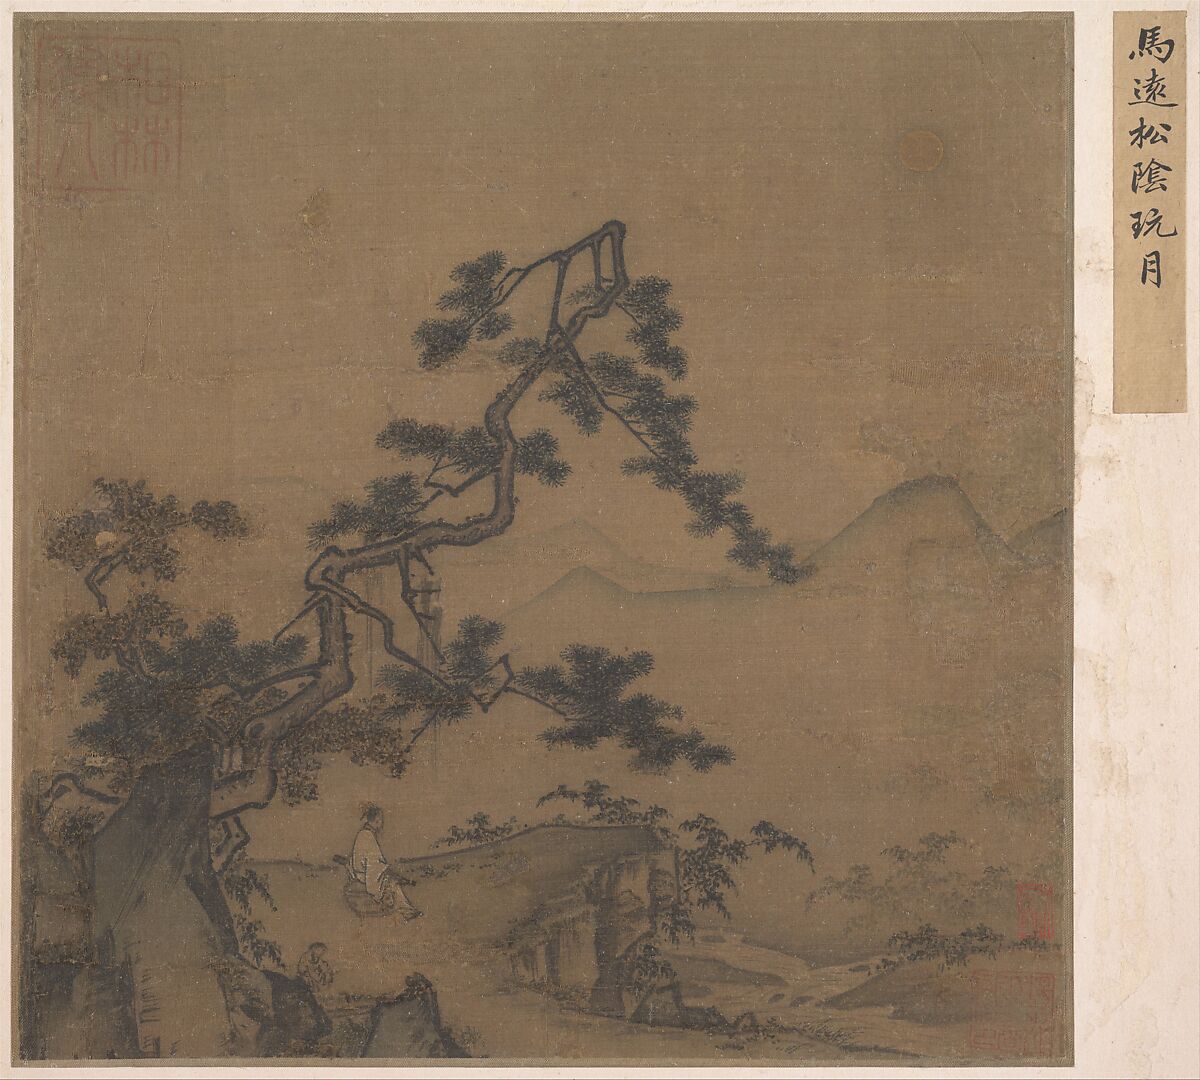 Viewing the Moon under a Pine Tree, After Ma Yuan (Chinese, active ca. 1190–1225), Album leaf; ink and color on silk, China 